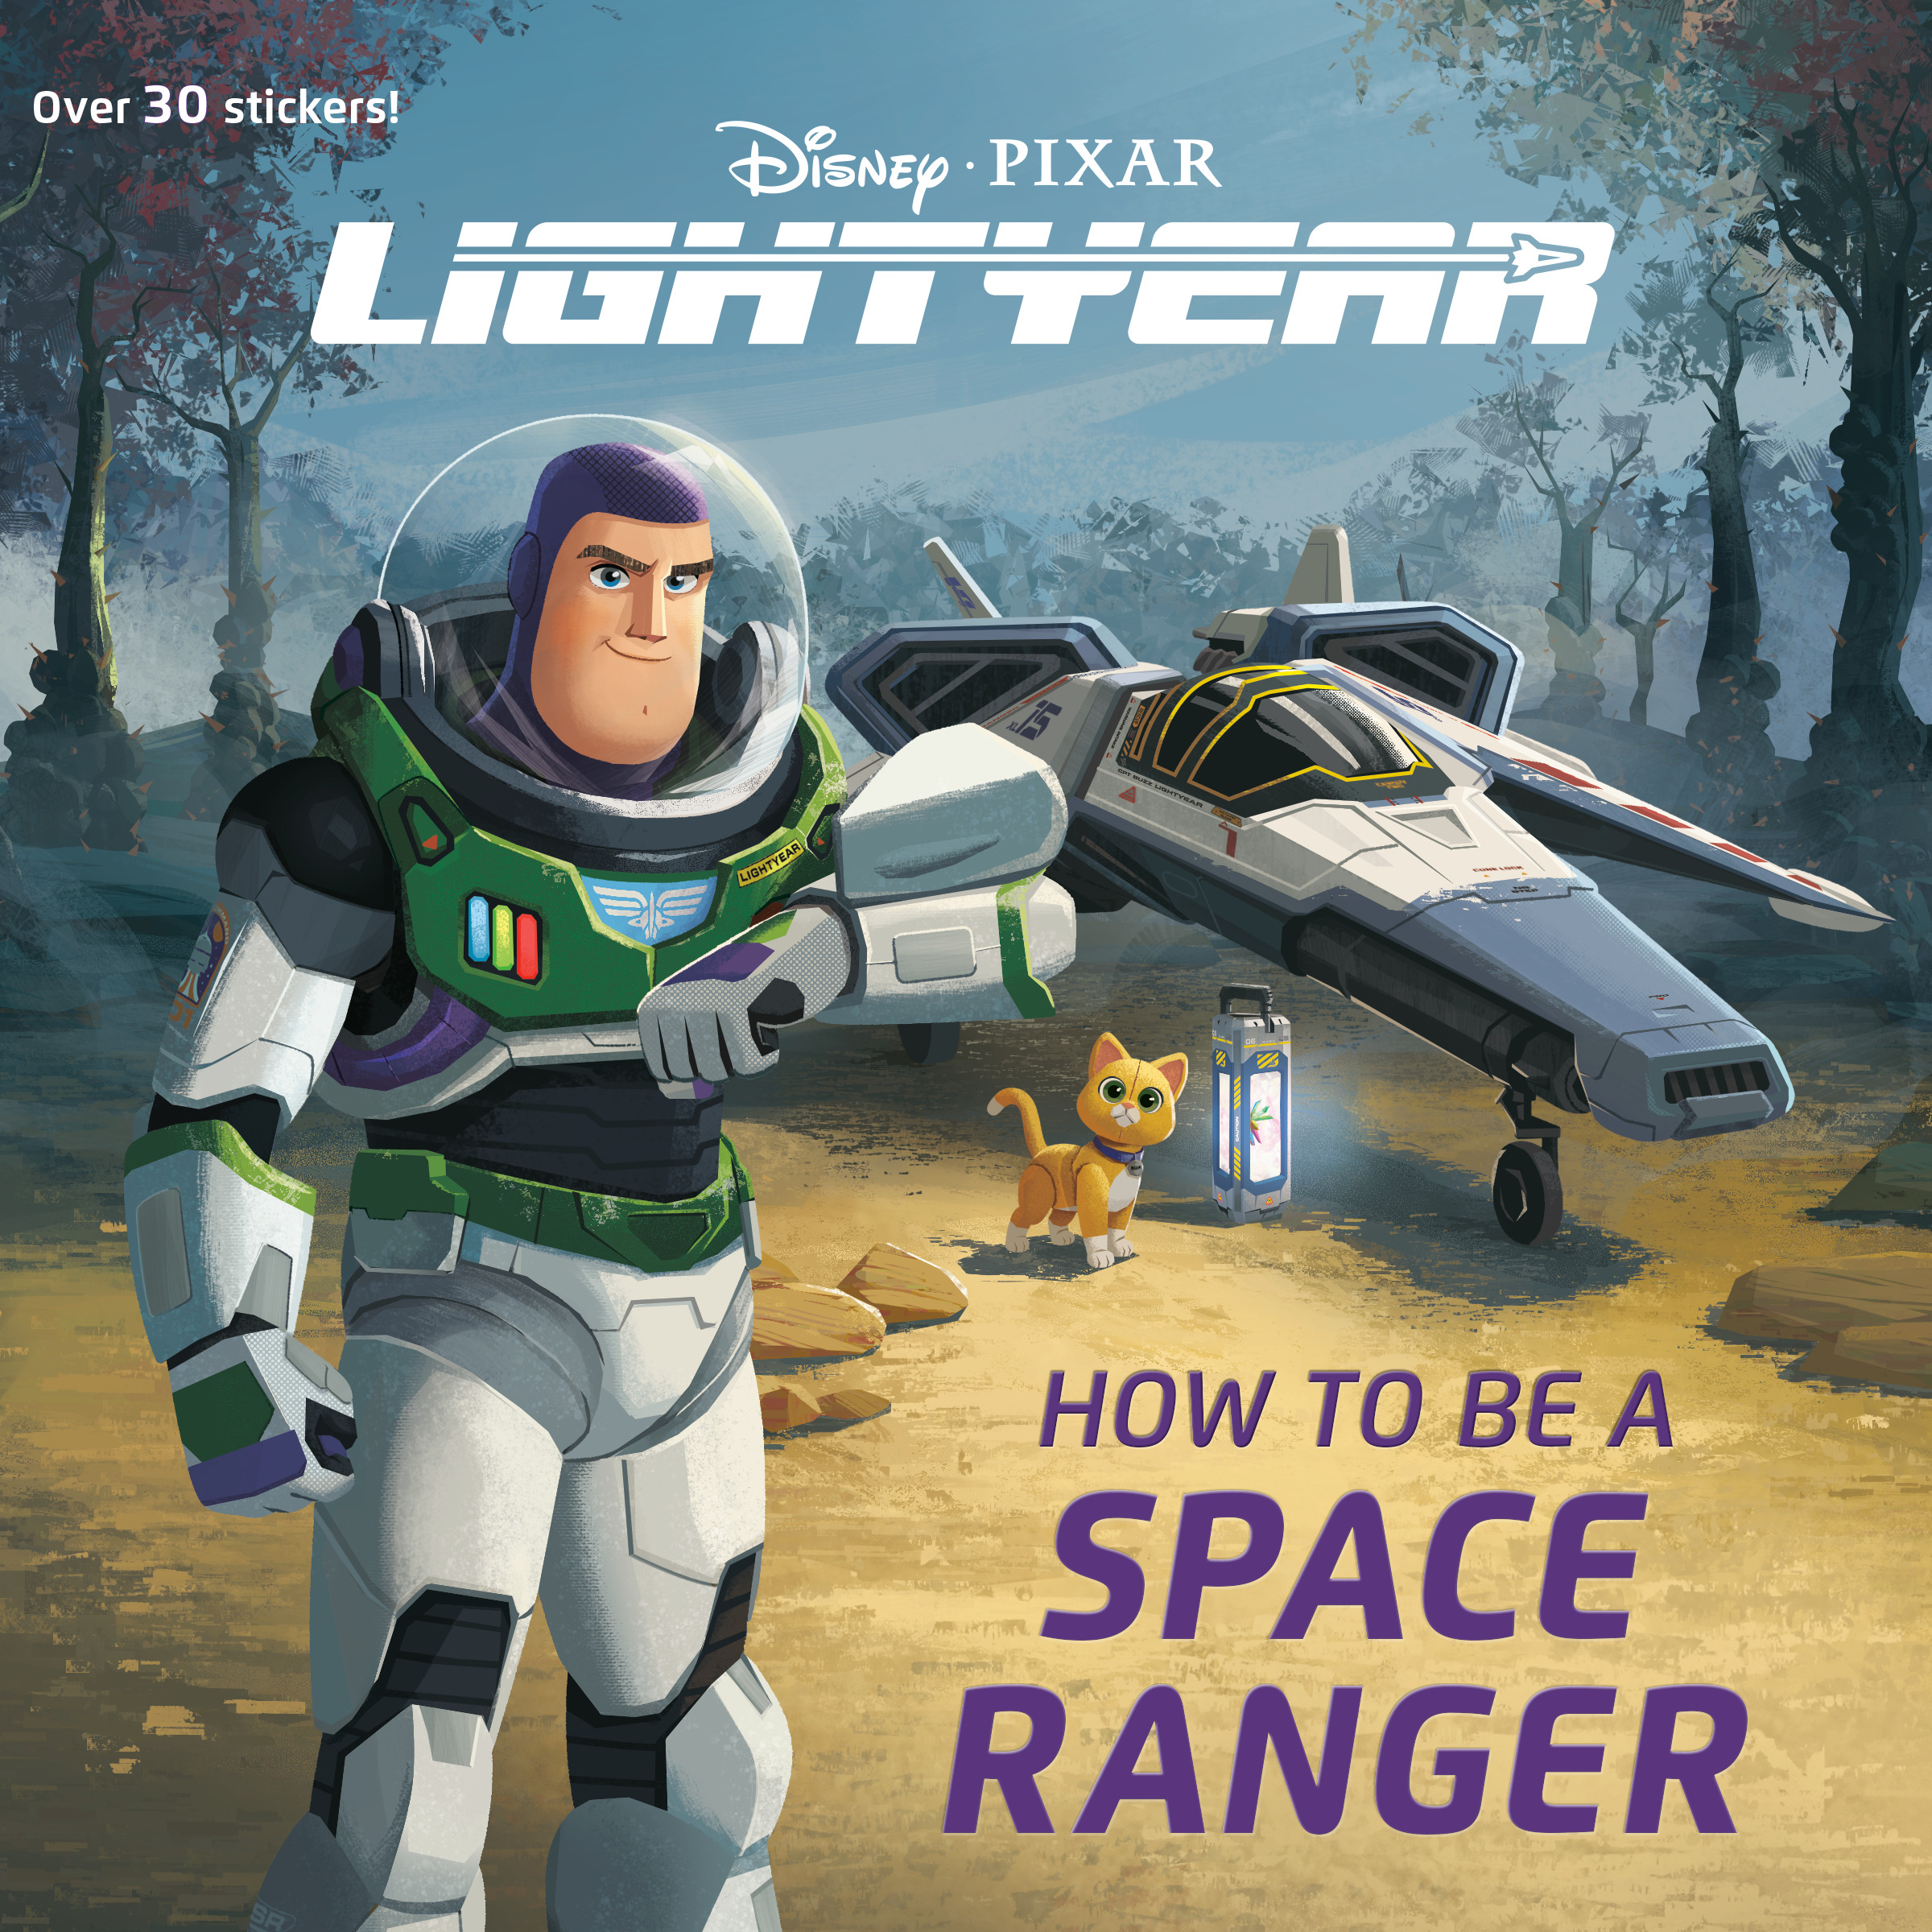 How to Be a Space Ranger (Disney/Pixar Lightyear) | 